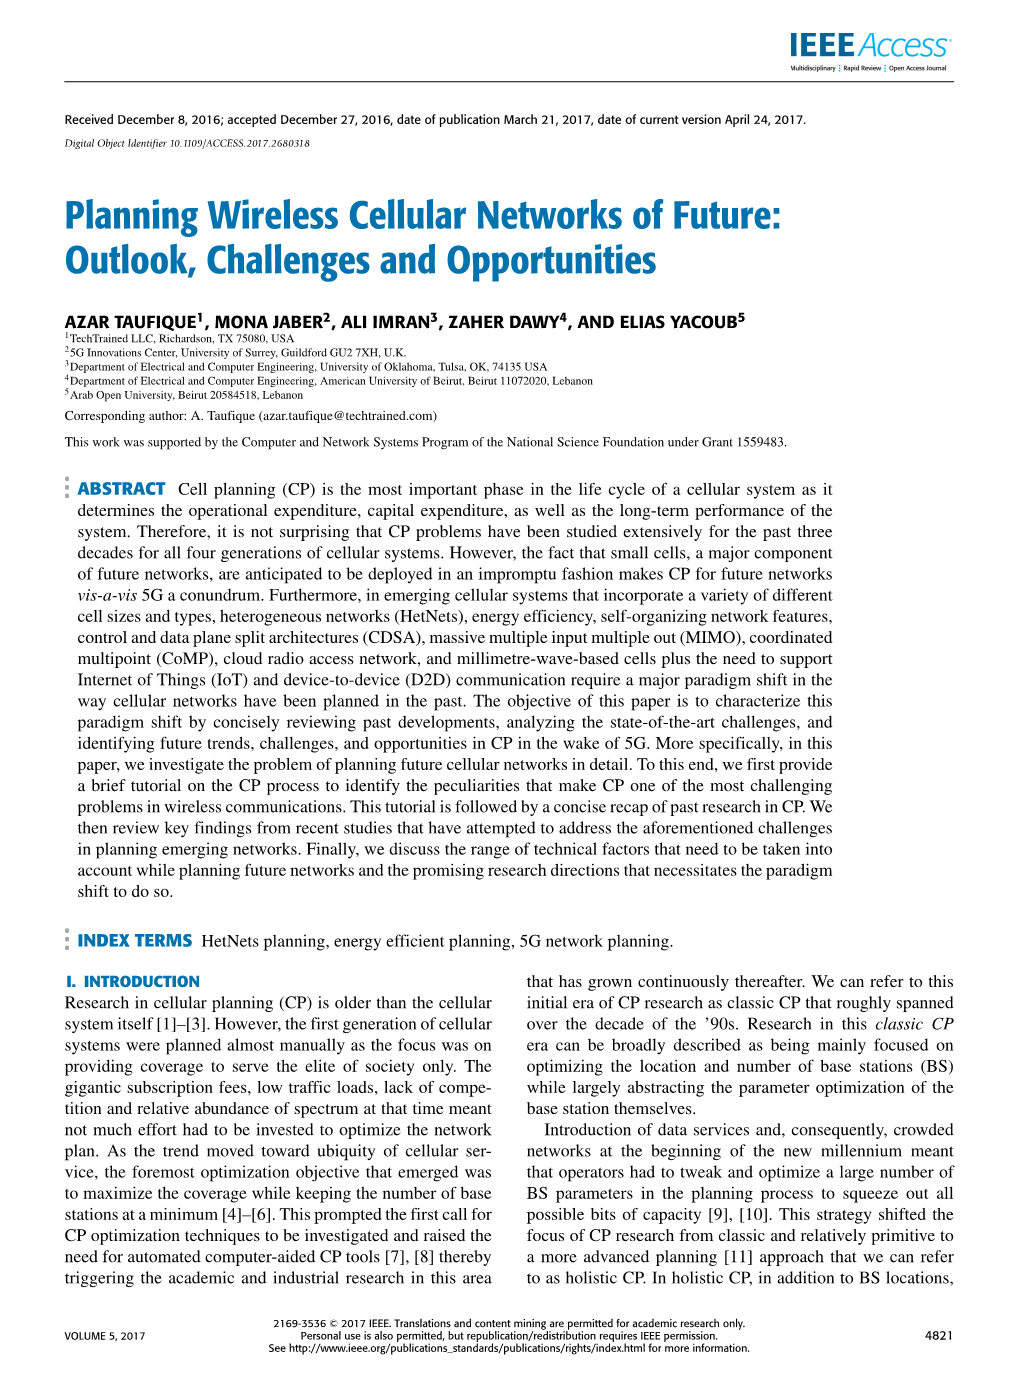 Planning Wireless Cellular Networks of Future: Outlook, Challenges and Opportunities